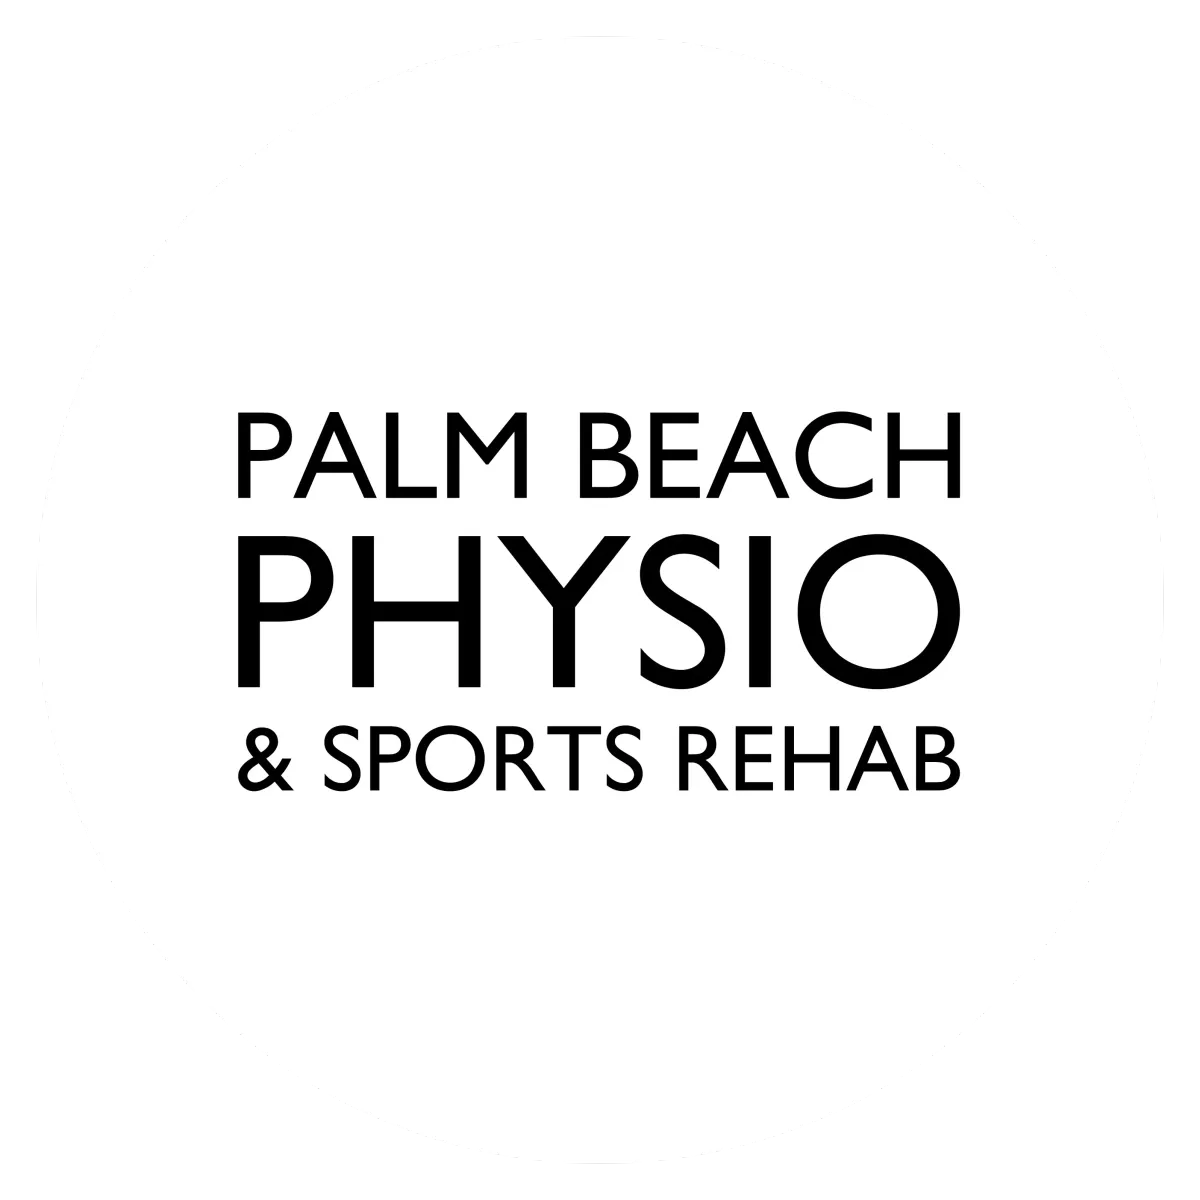 Palm Beach Physio and Sports Rehab: representing premier physiotherapy services in Palm Beach.